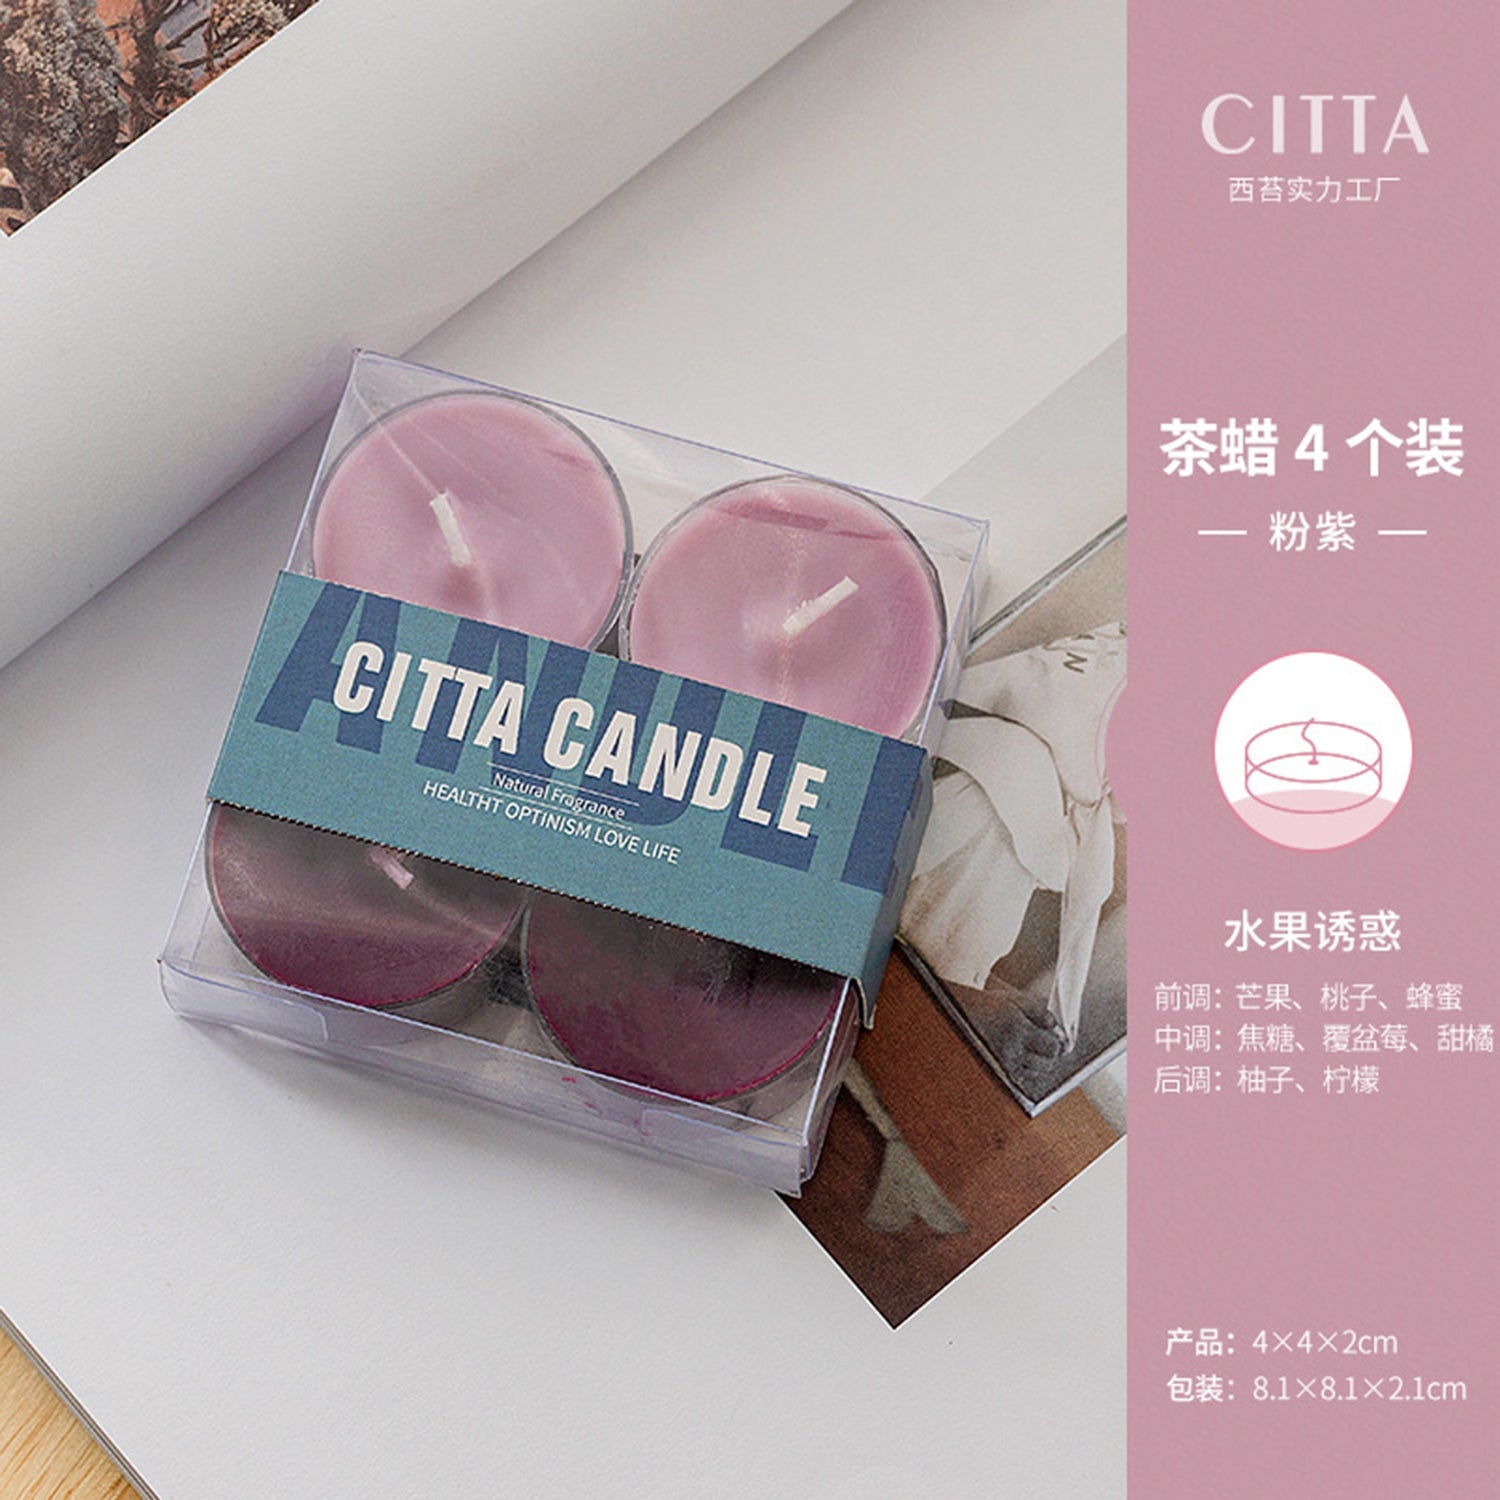 CITTA Elegant Series Scented Candle Aromantic Natural Soy Wax 15G Home Fragrance Aromatherapy (Pack Of 4) Scented Candle CITTA Fruit Temptation 